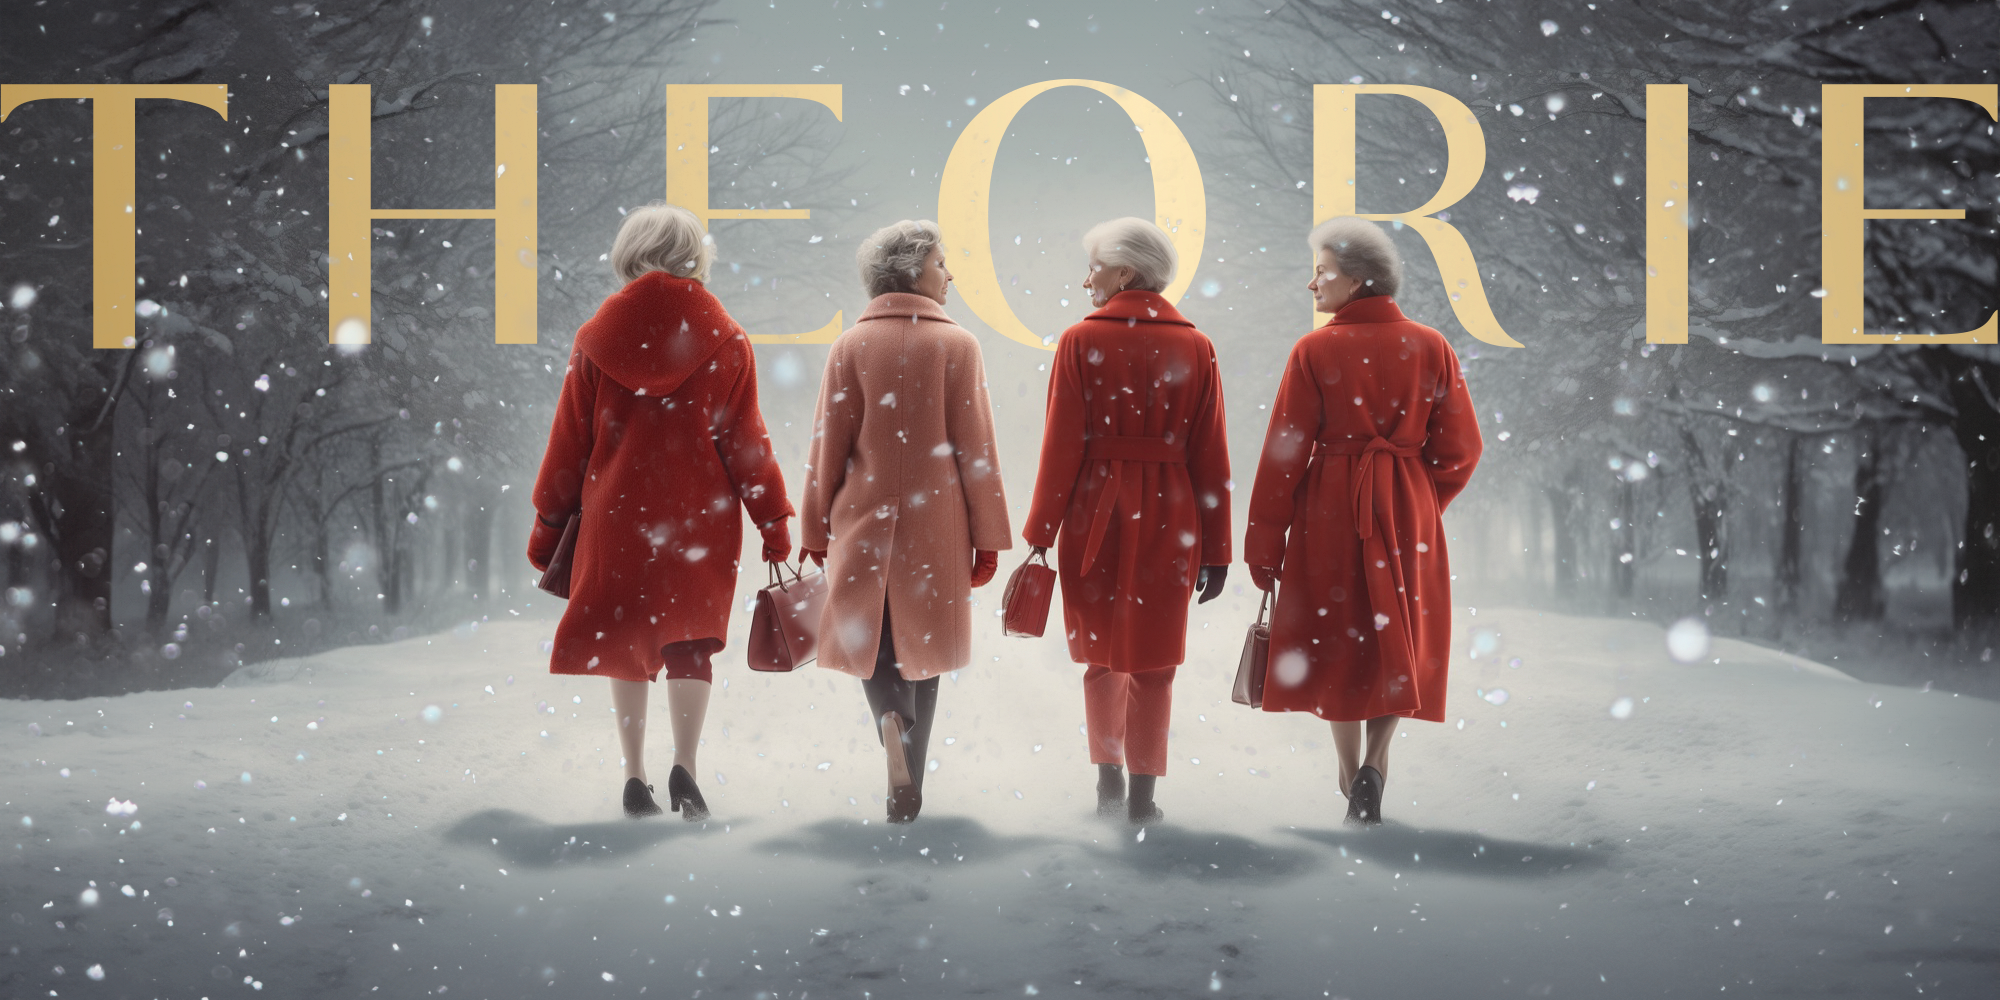 The image depicts four women, each wearing elegant coats, walking in the snow. Two are in vibrant red coats, while the other two don a soft peach and a deep red coat respectively. They all carry handbags and appear in conversation, facing each other in pairs. The backdrop is a snowy landscape with bare trees, enhancing the serene yet sophisticated atmosphere of the scene. The women’s attire and poised demeanor suggest a blend of grace and confidence.